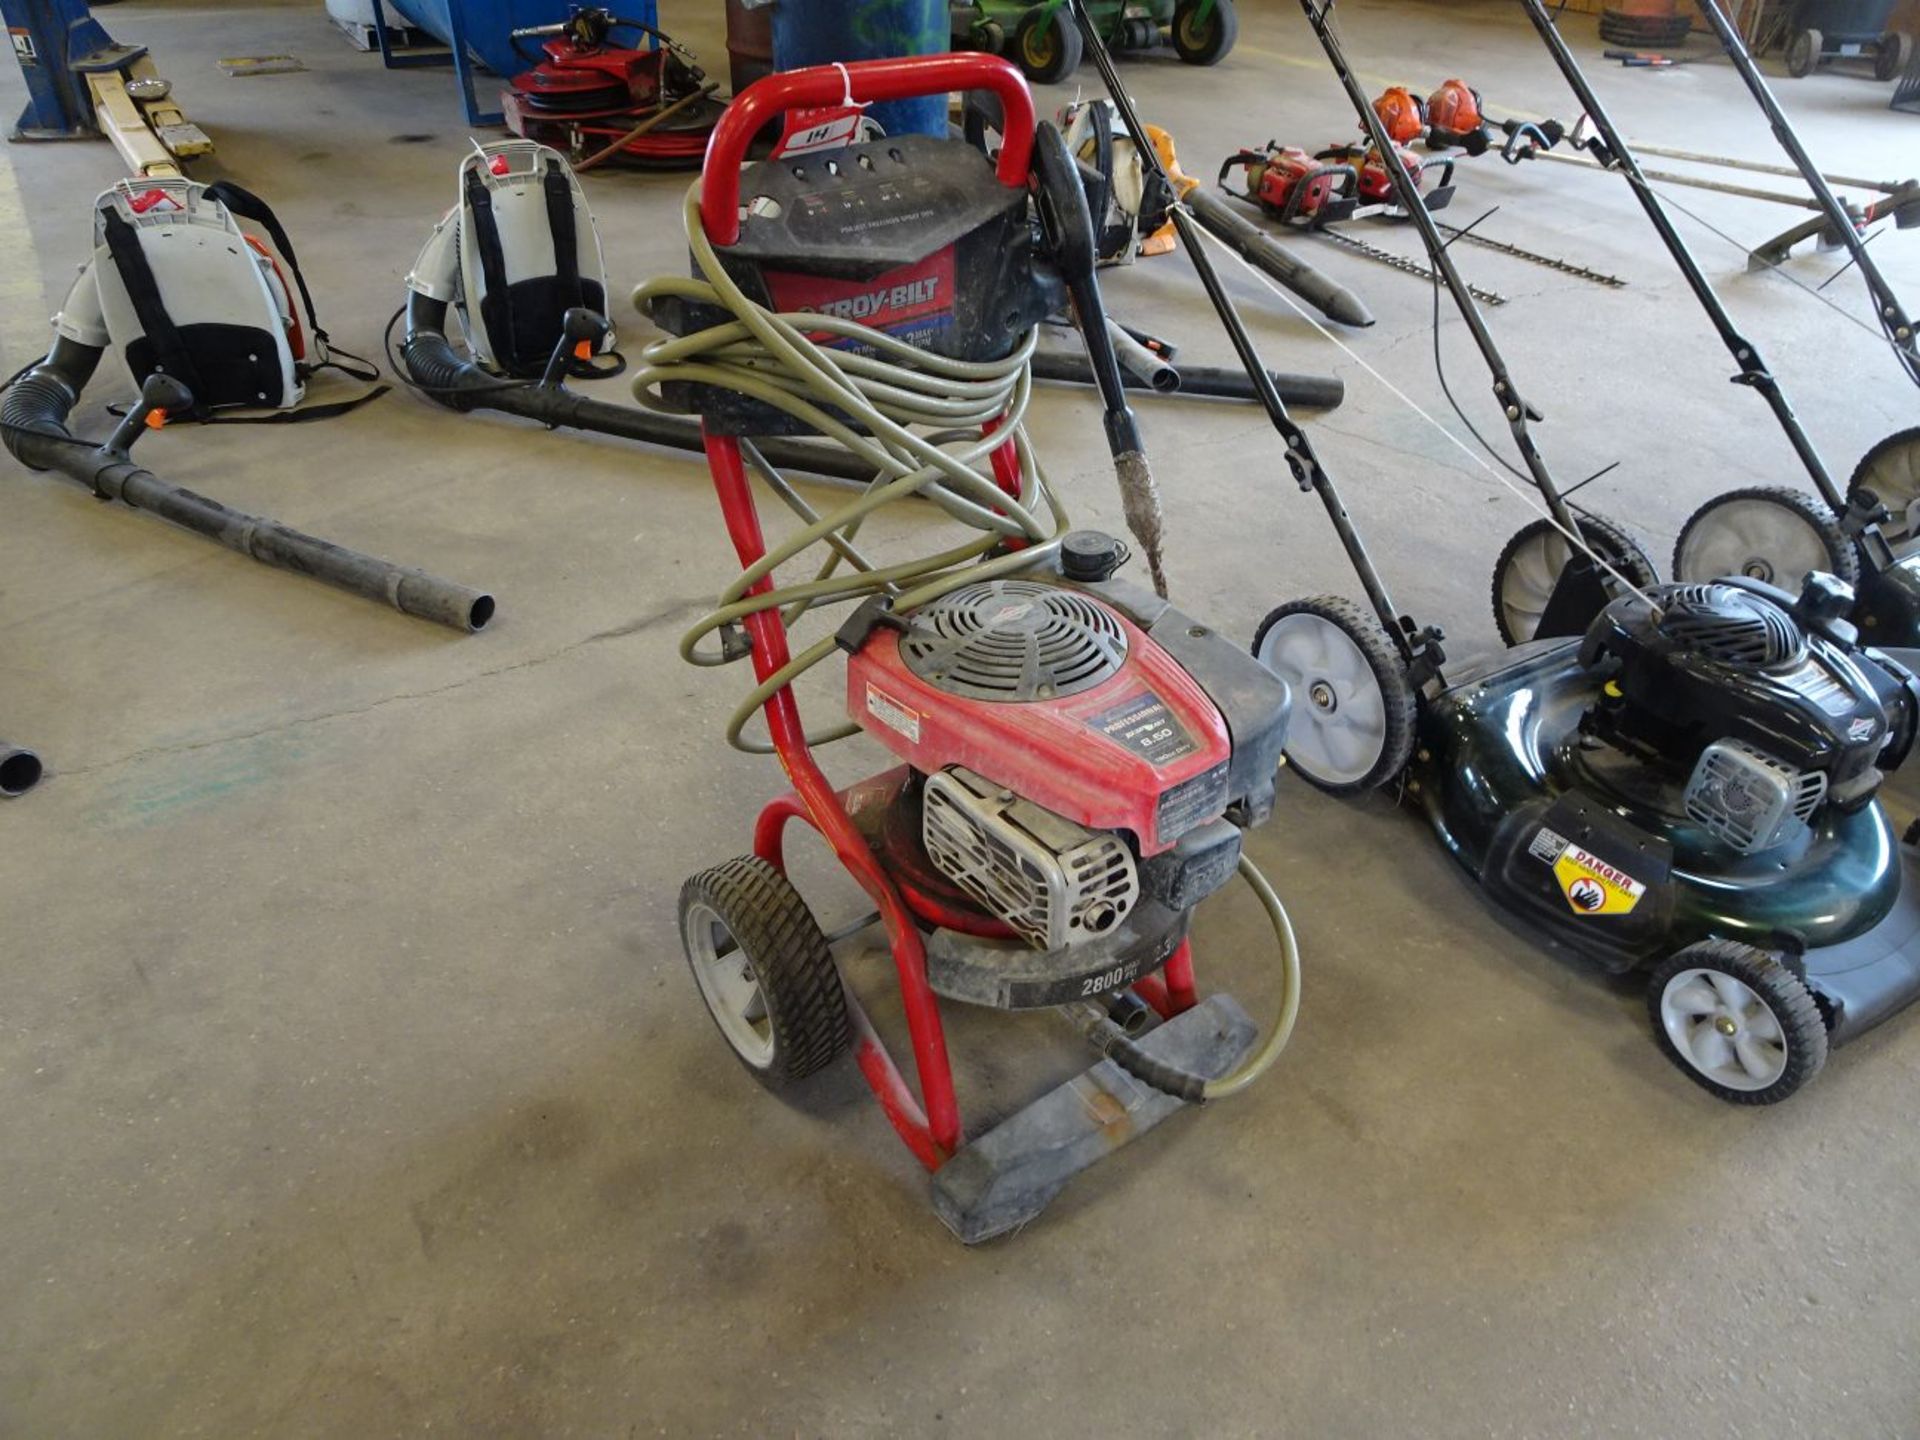 TROY BILT PRESSURE WASHER WITH HOSE AND WAND, 2800 MAX PSI (LOCATION: SHOP)